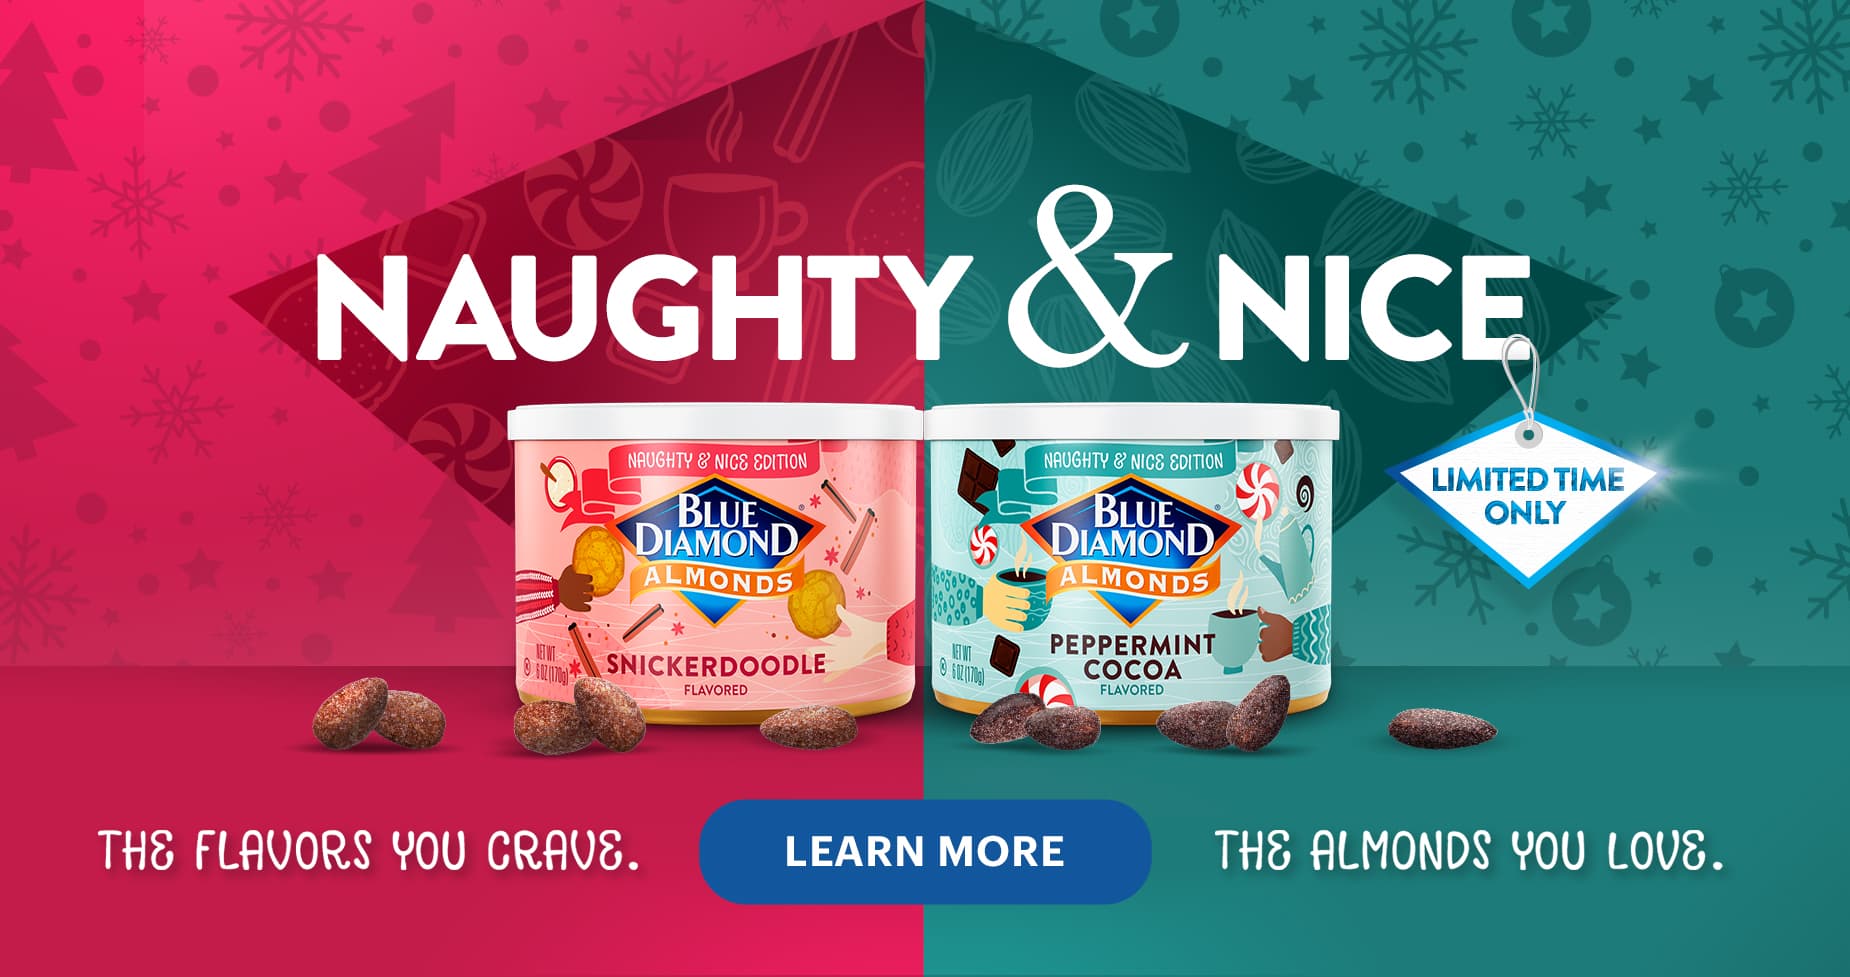 Blue Diamond Almonds. Naughty & Nice. Limited Time Only. The flavors you crave. The almonds you love. Learn More